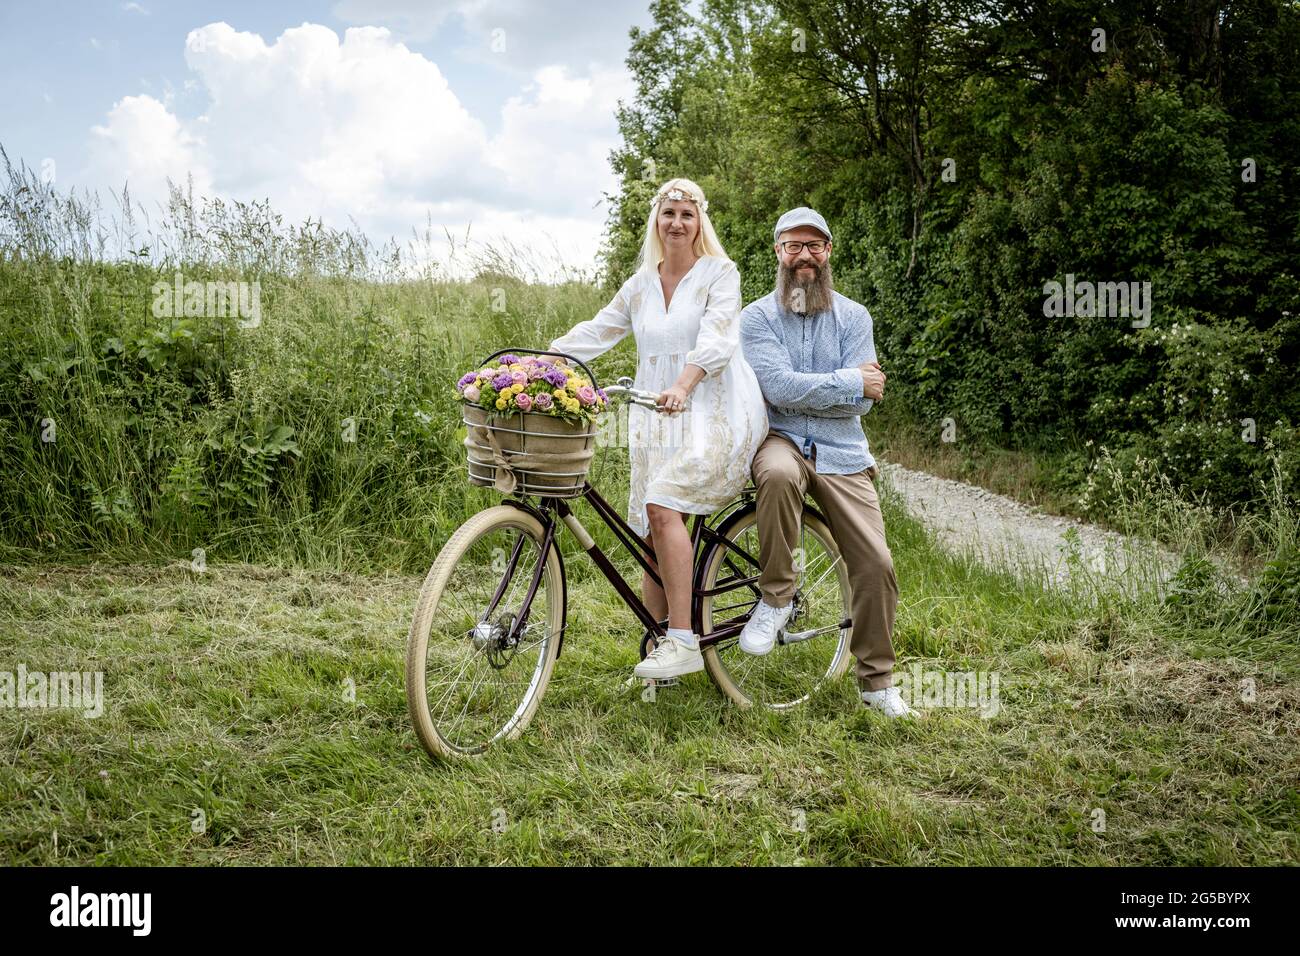 blonde woman with white dress and her boyfriend or husband posing with bicycle with beautifully decorated flower basket in nature and are happy and in Stock Photo